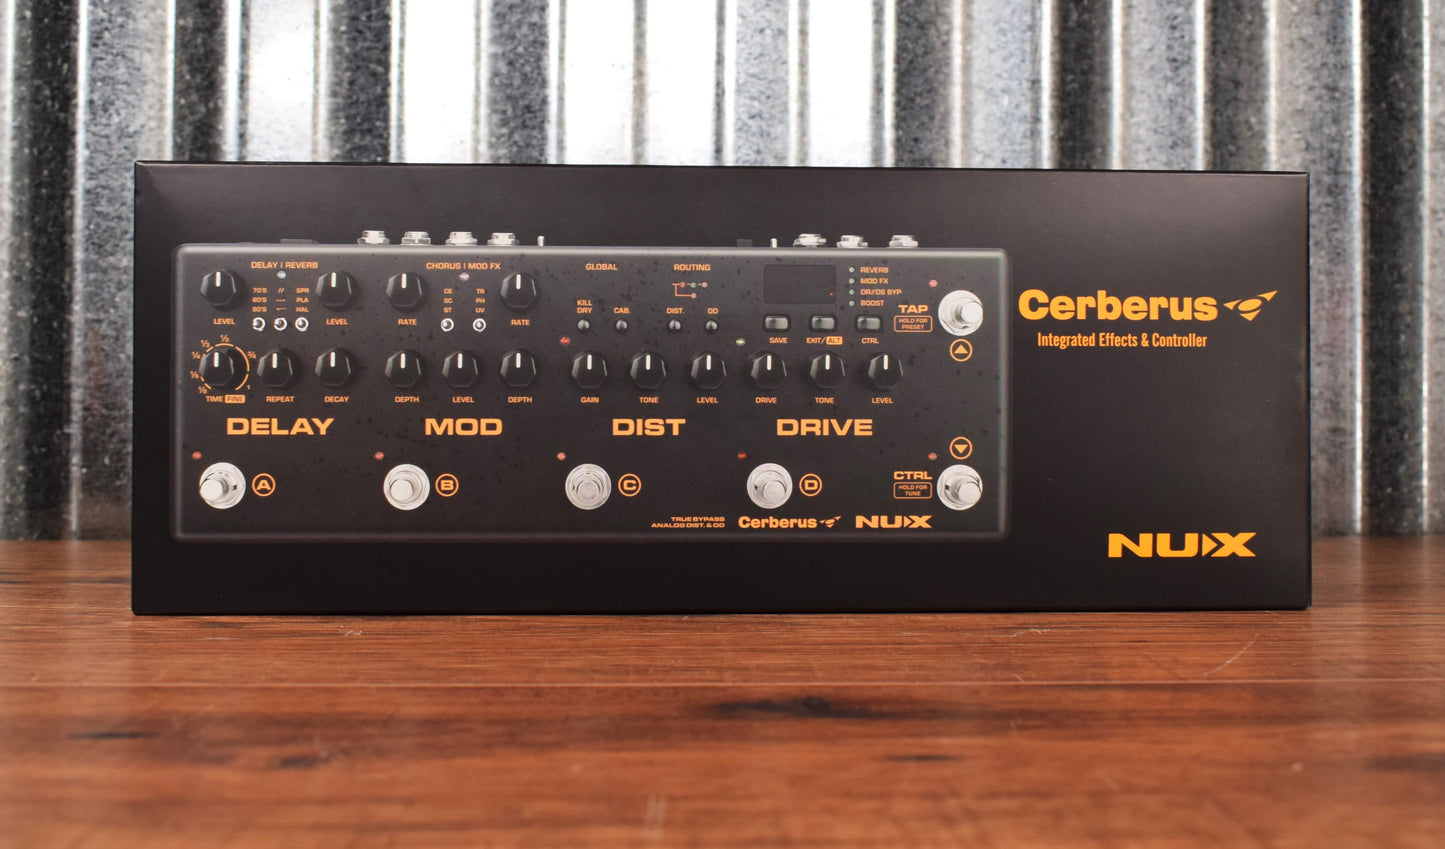 NUX Cerberus Programmable Multi-Effect Delay Modulation Distortion Overdrive Guitar Effect Pedal